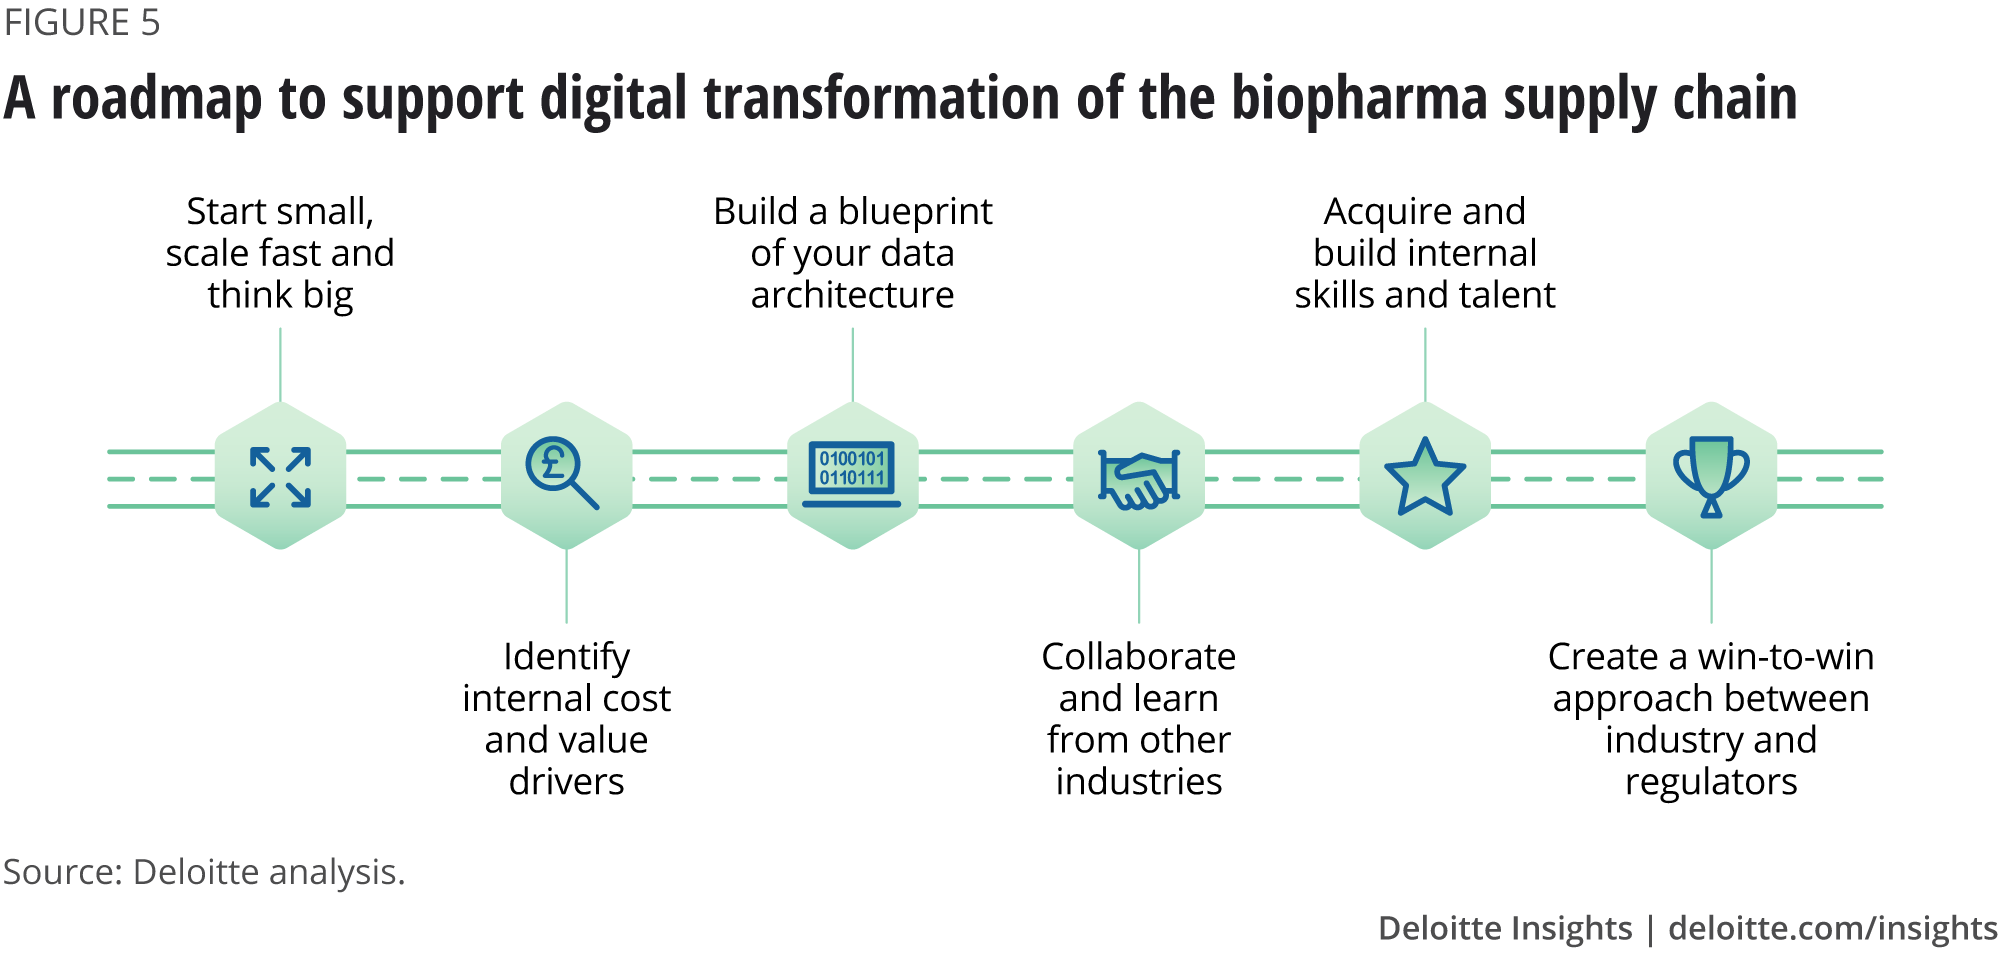 A roadmap to support digital transformation of the biopharma supply chain